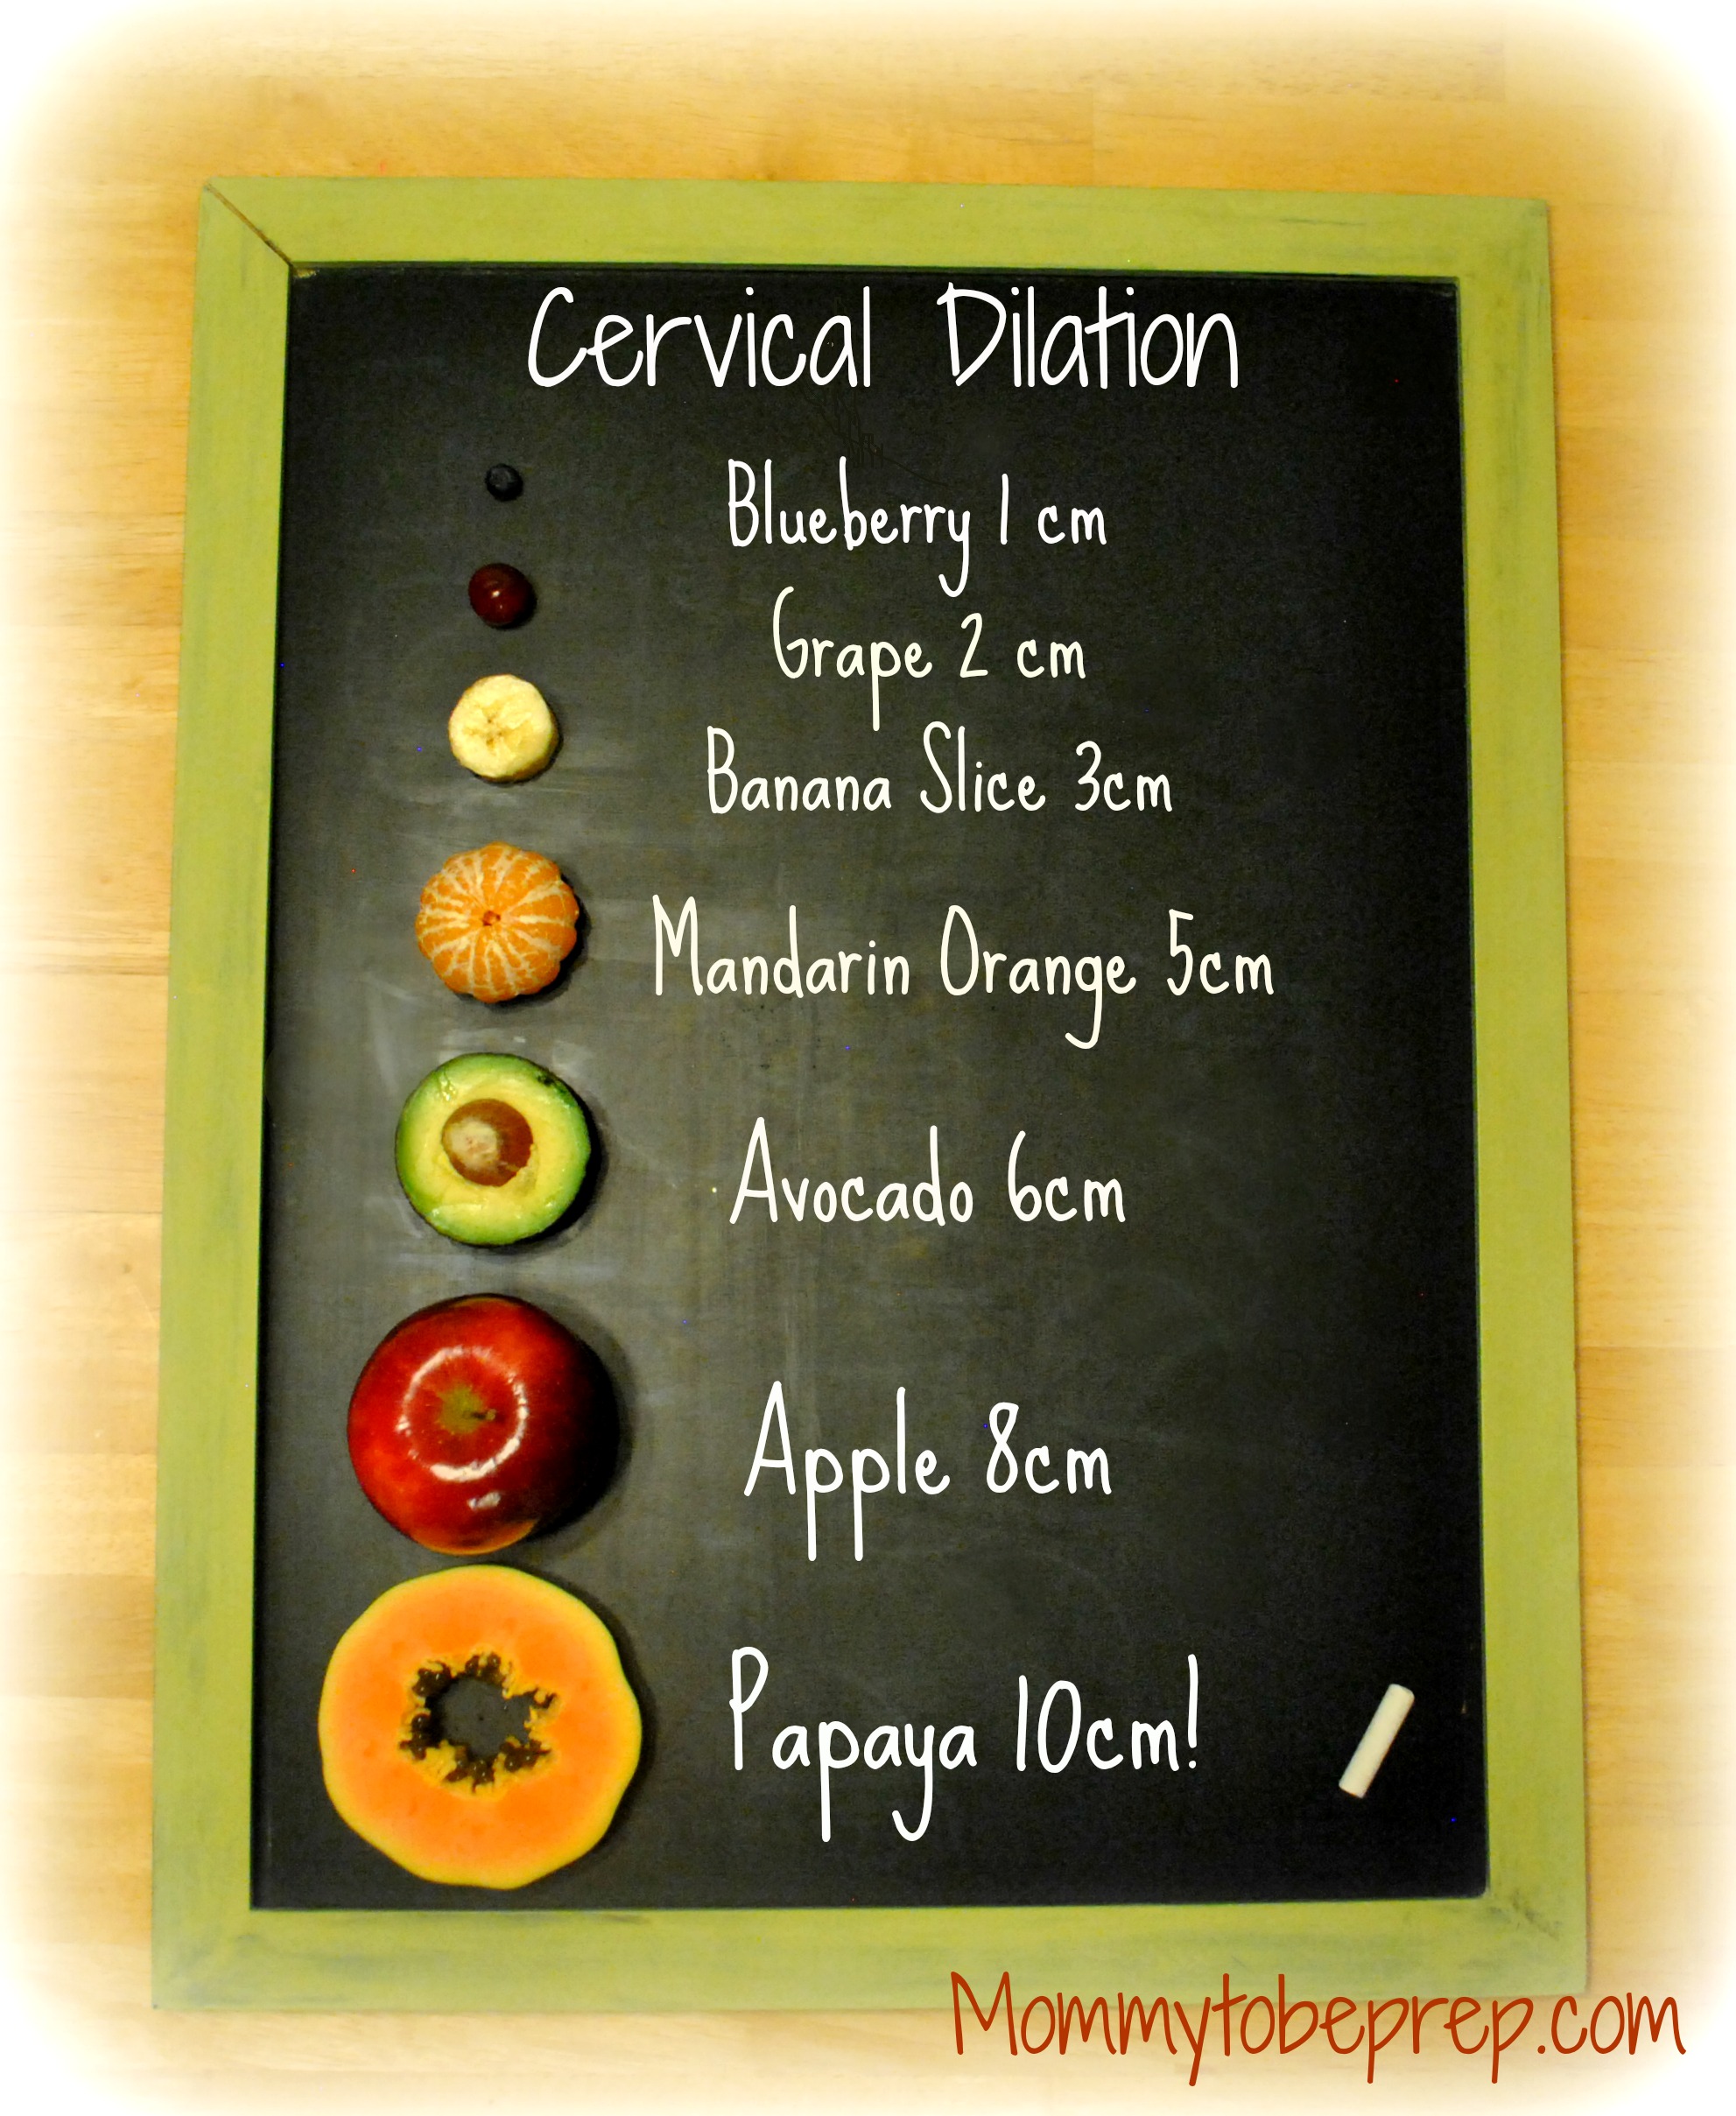 Cervical Dilation & Effacement with a Fruity Theme